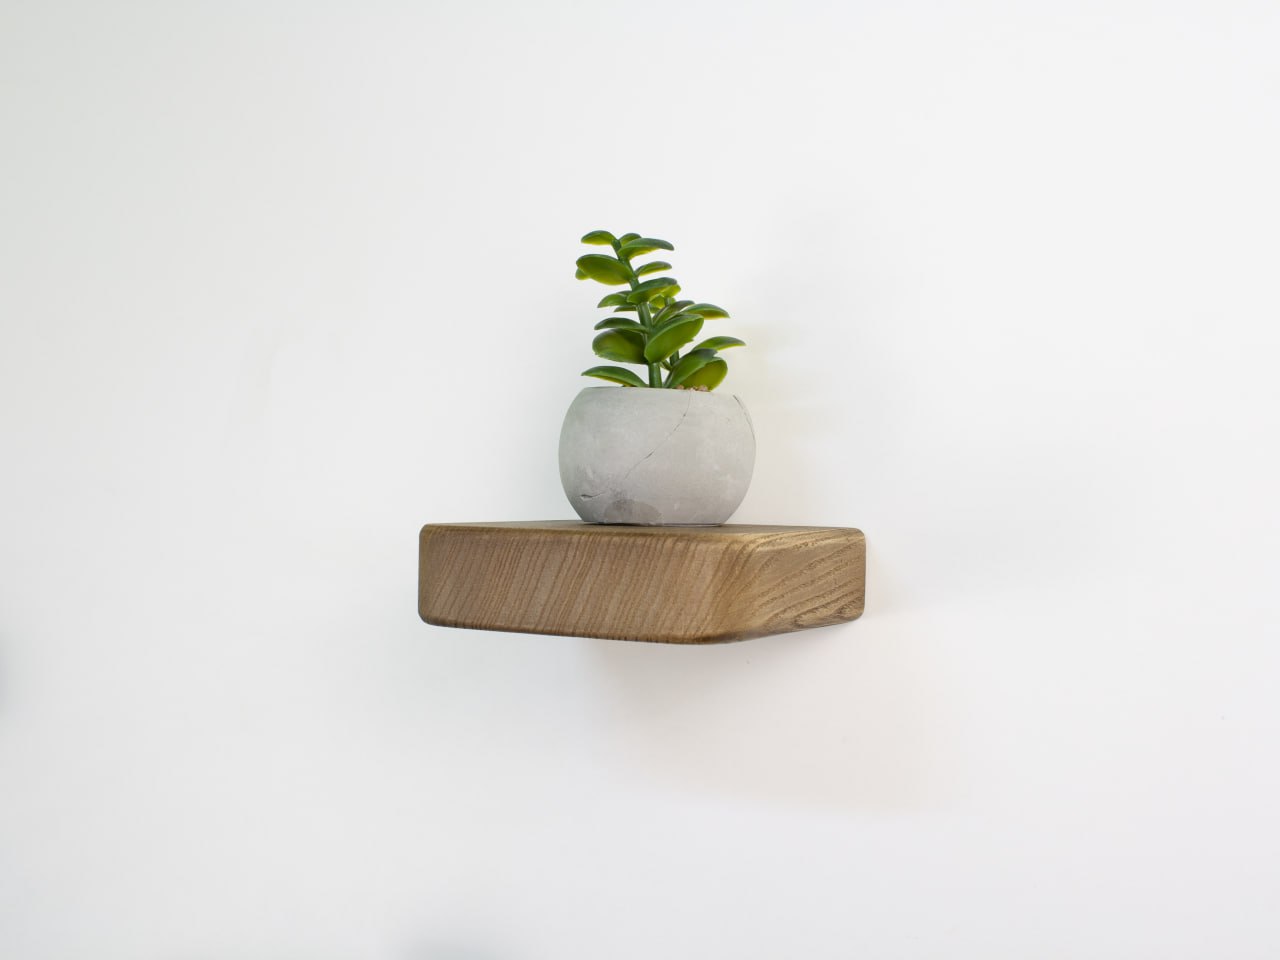 Handcrafted Floating Wood Shelves for Stylish Décor